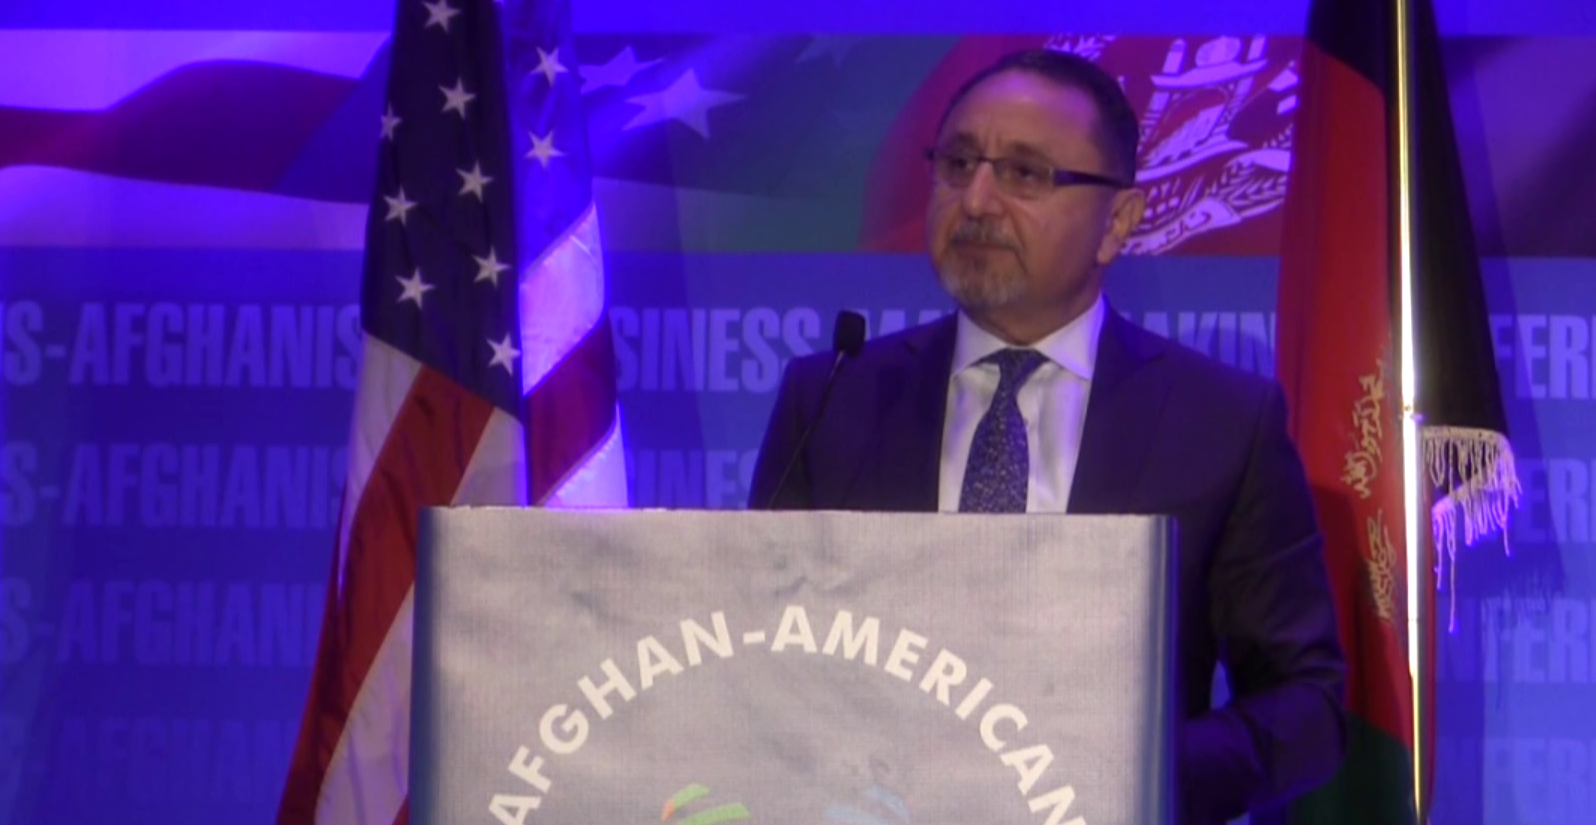 BAYAT GROUP FOUNDER AND CHAIRMAN DR. EHSAN BAYAT DELIVERS KEYNOTE ADDRESS TO AFGHAN AMERICAN CHAMBER OF COMMERCE ANNUAL BUSINESS CONFERENCE